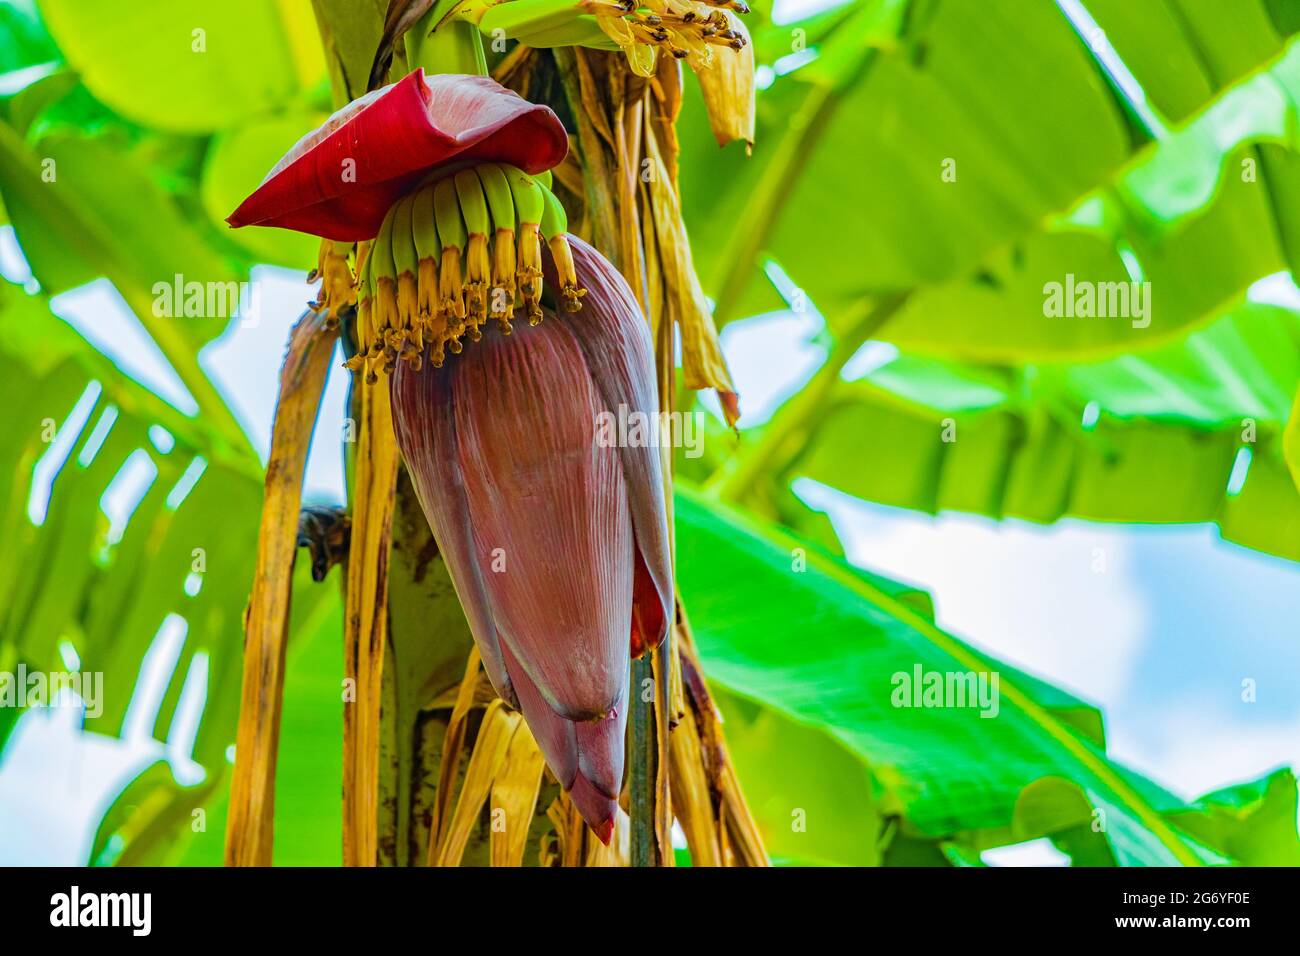 Green yellow bananas are growing with banana blossom flower on Koh Samui island in Thailand. Stock Photo